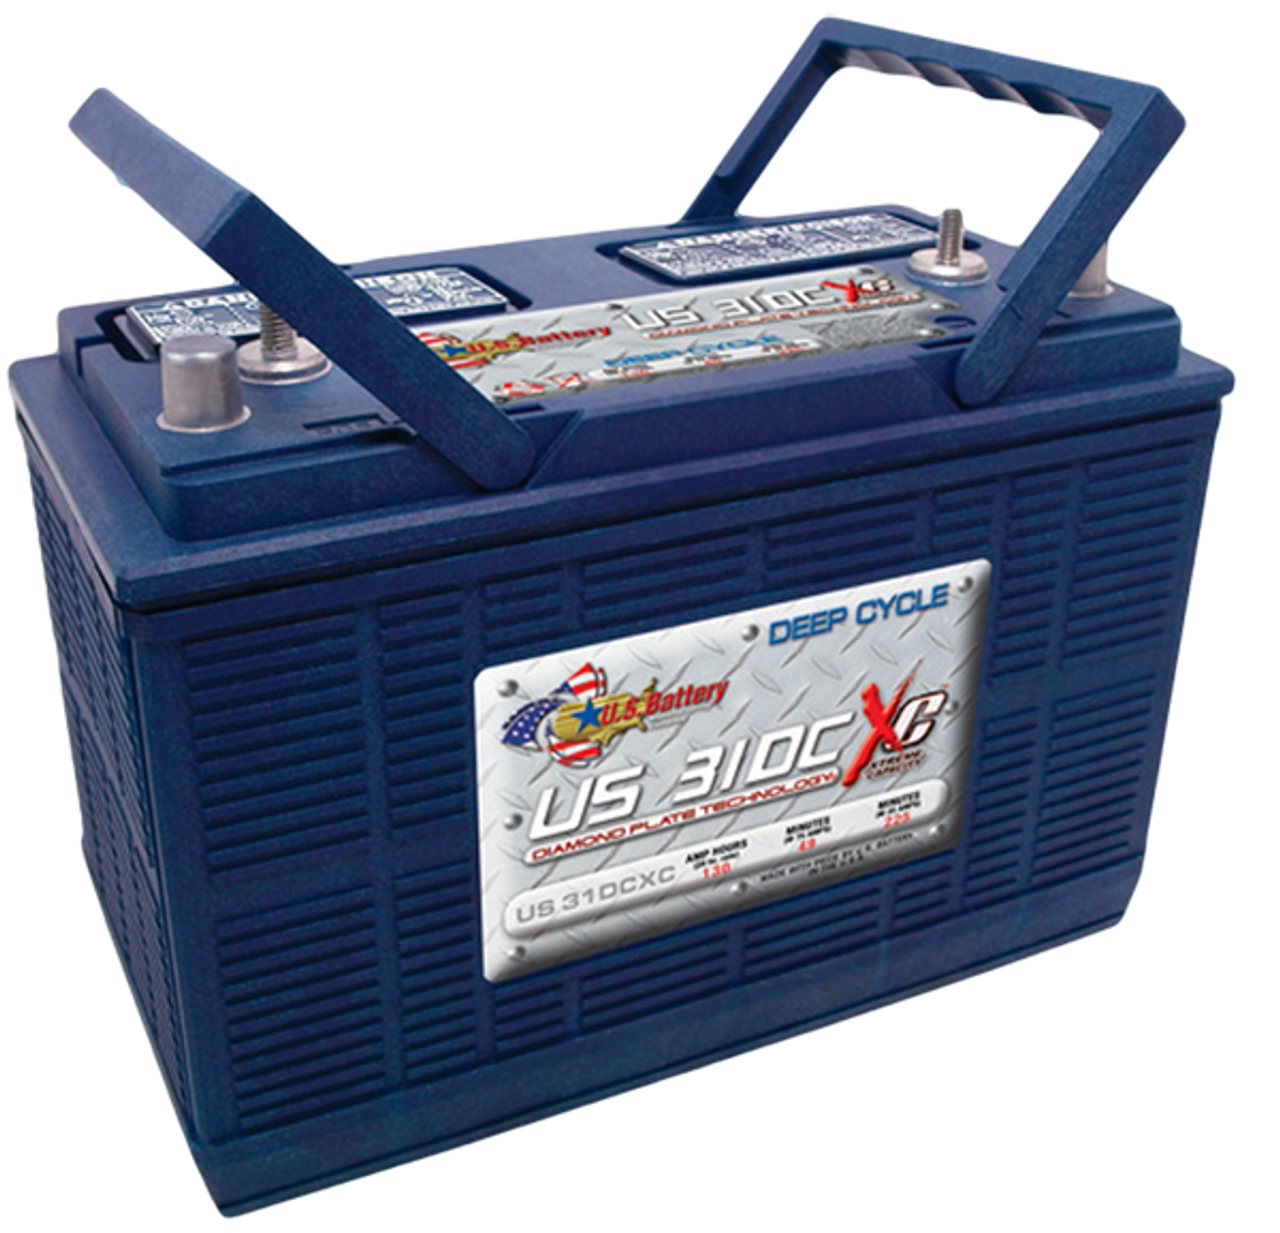 lot de 2 batteries 12V CROWN 130ah pro Deep Cycle  Made in USA